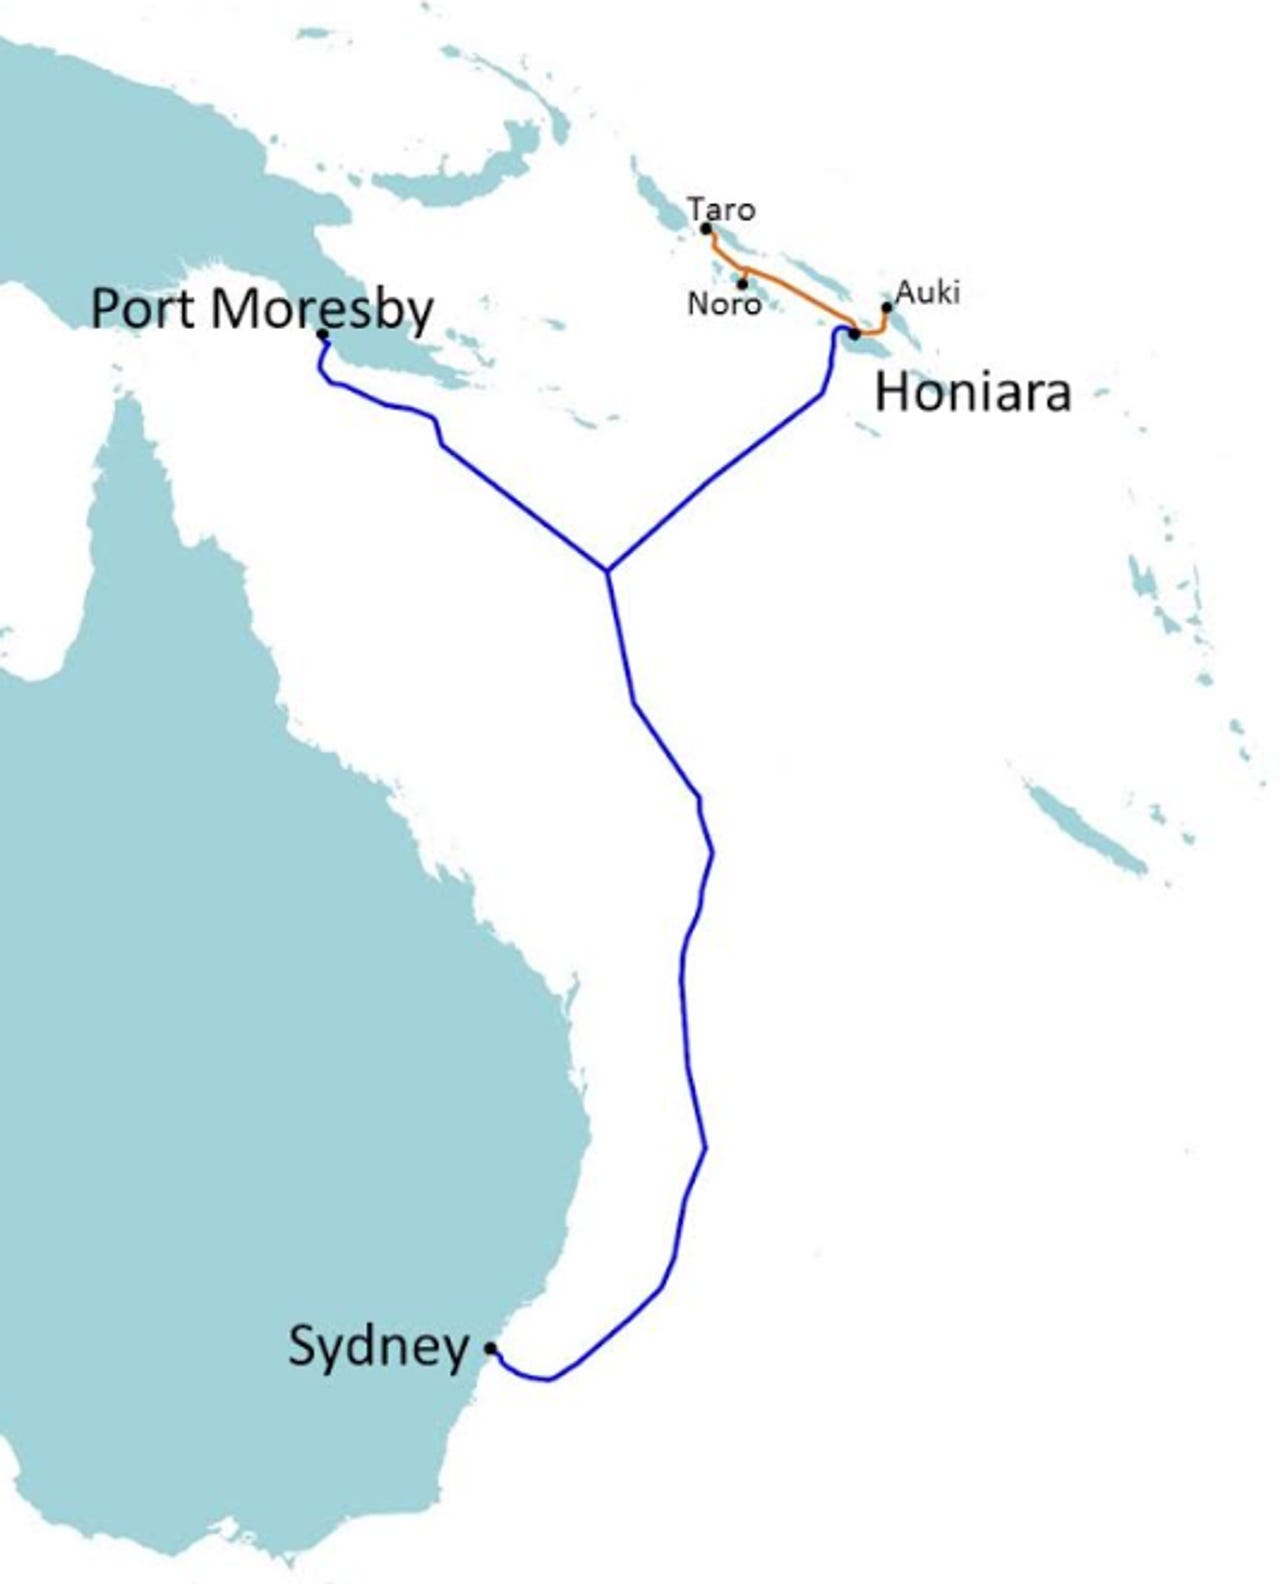 vocus-png-subsea-cable.png